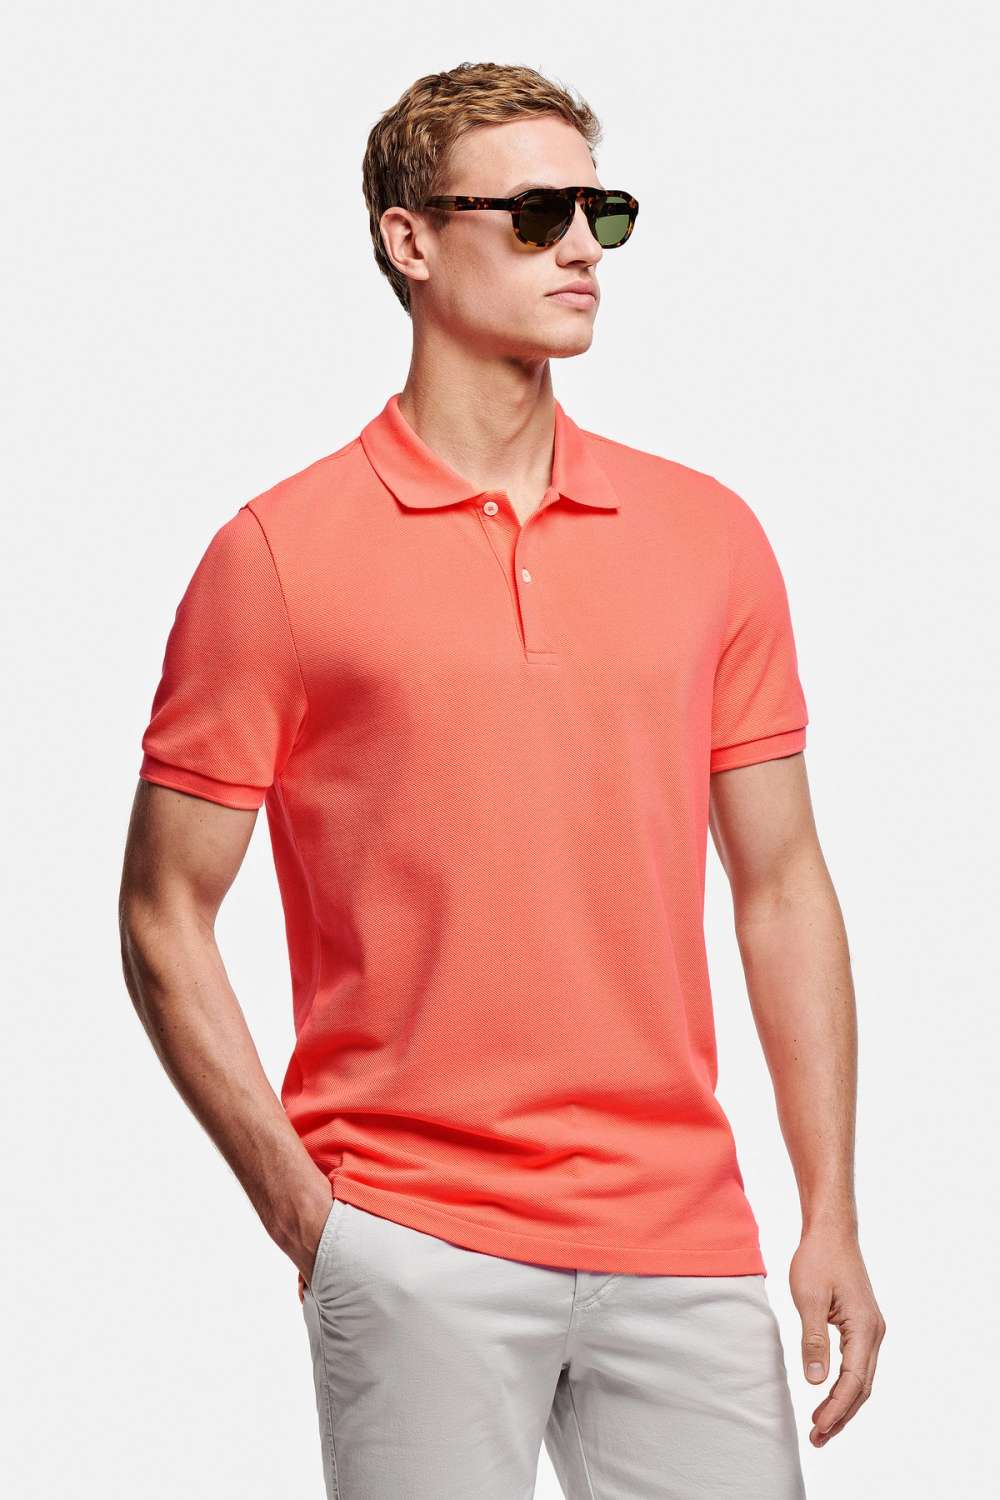 Sunsets * The Classic Polo